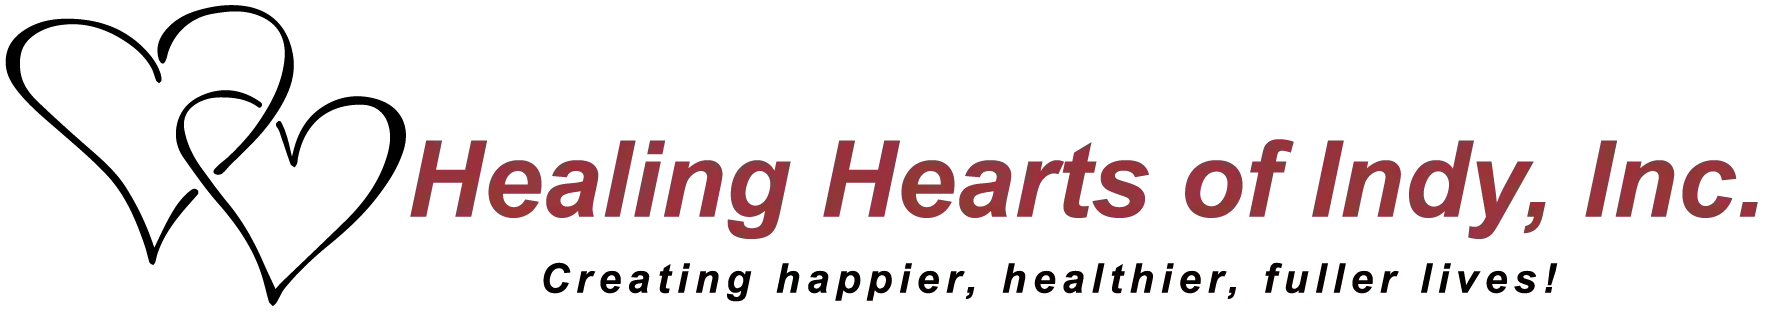 Healing Hearts of Indy, Inc